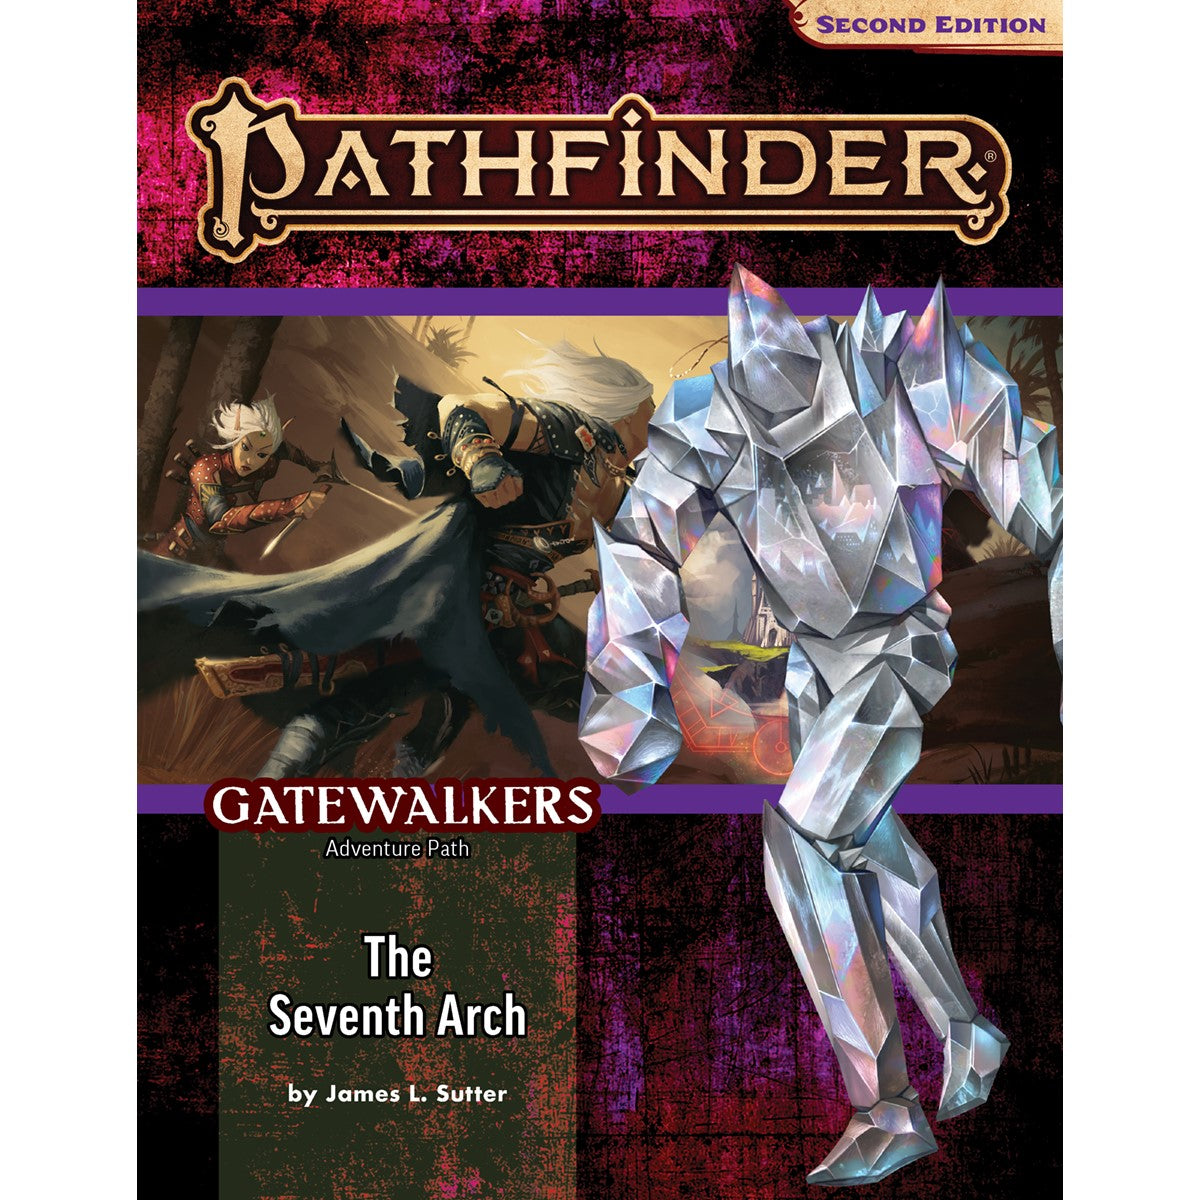 Pathfinder Second Edition Adventure Path: Gatewalkers #1 The Seventh Arch